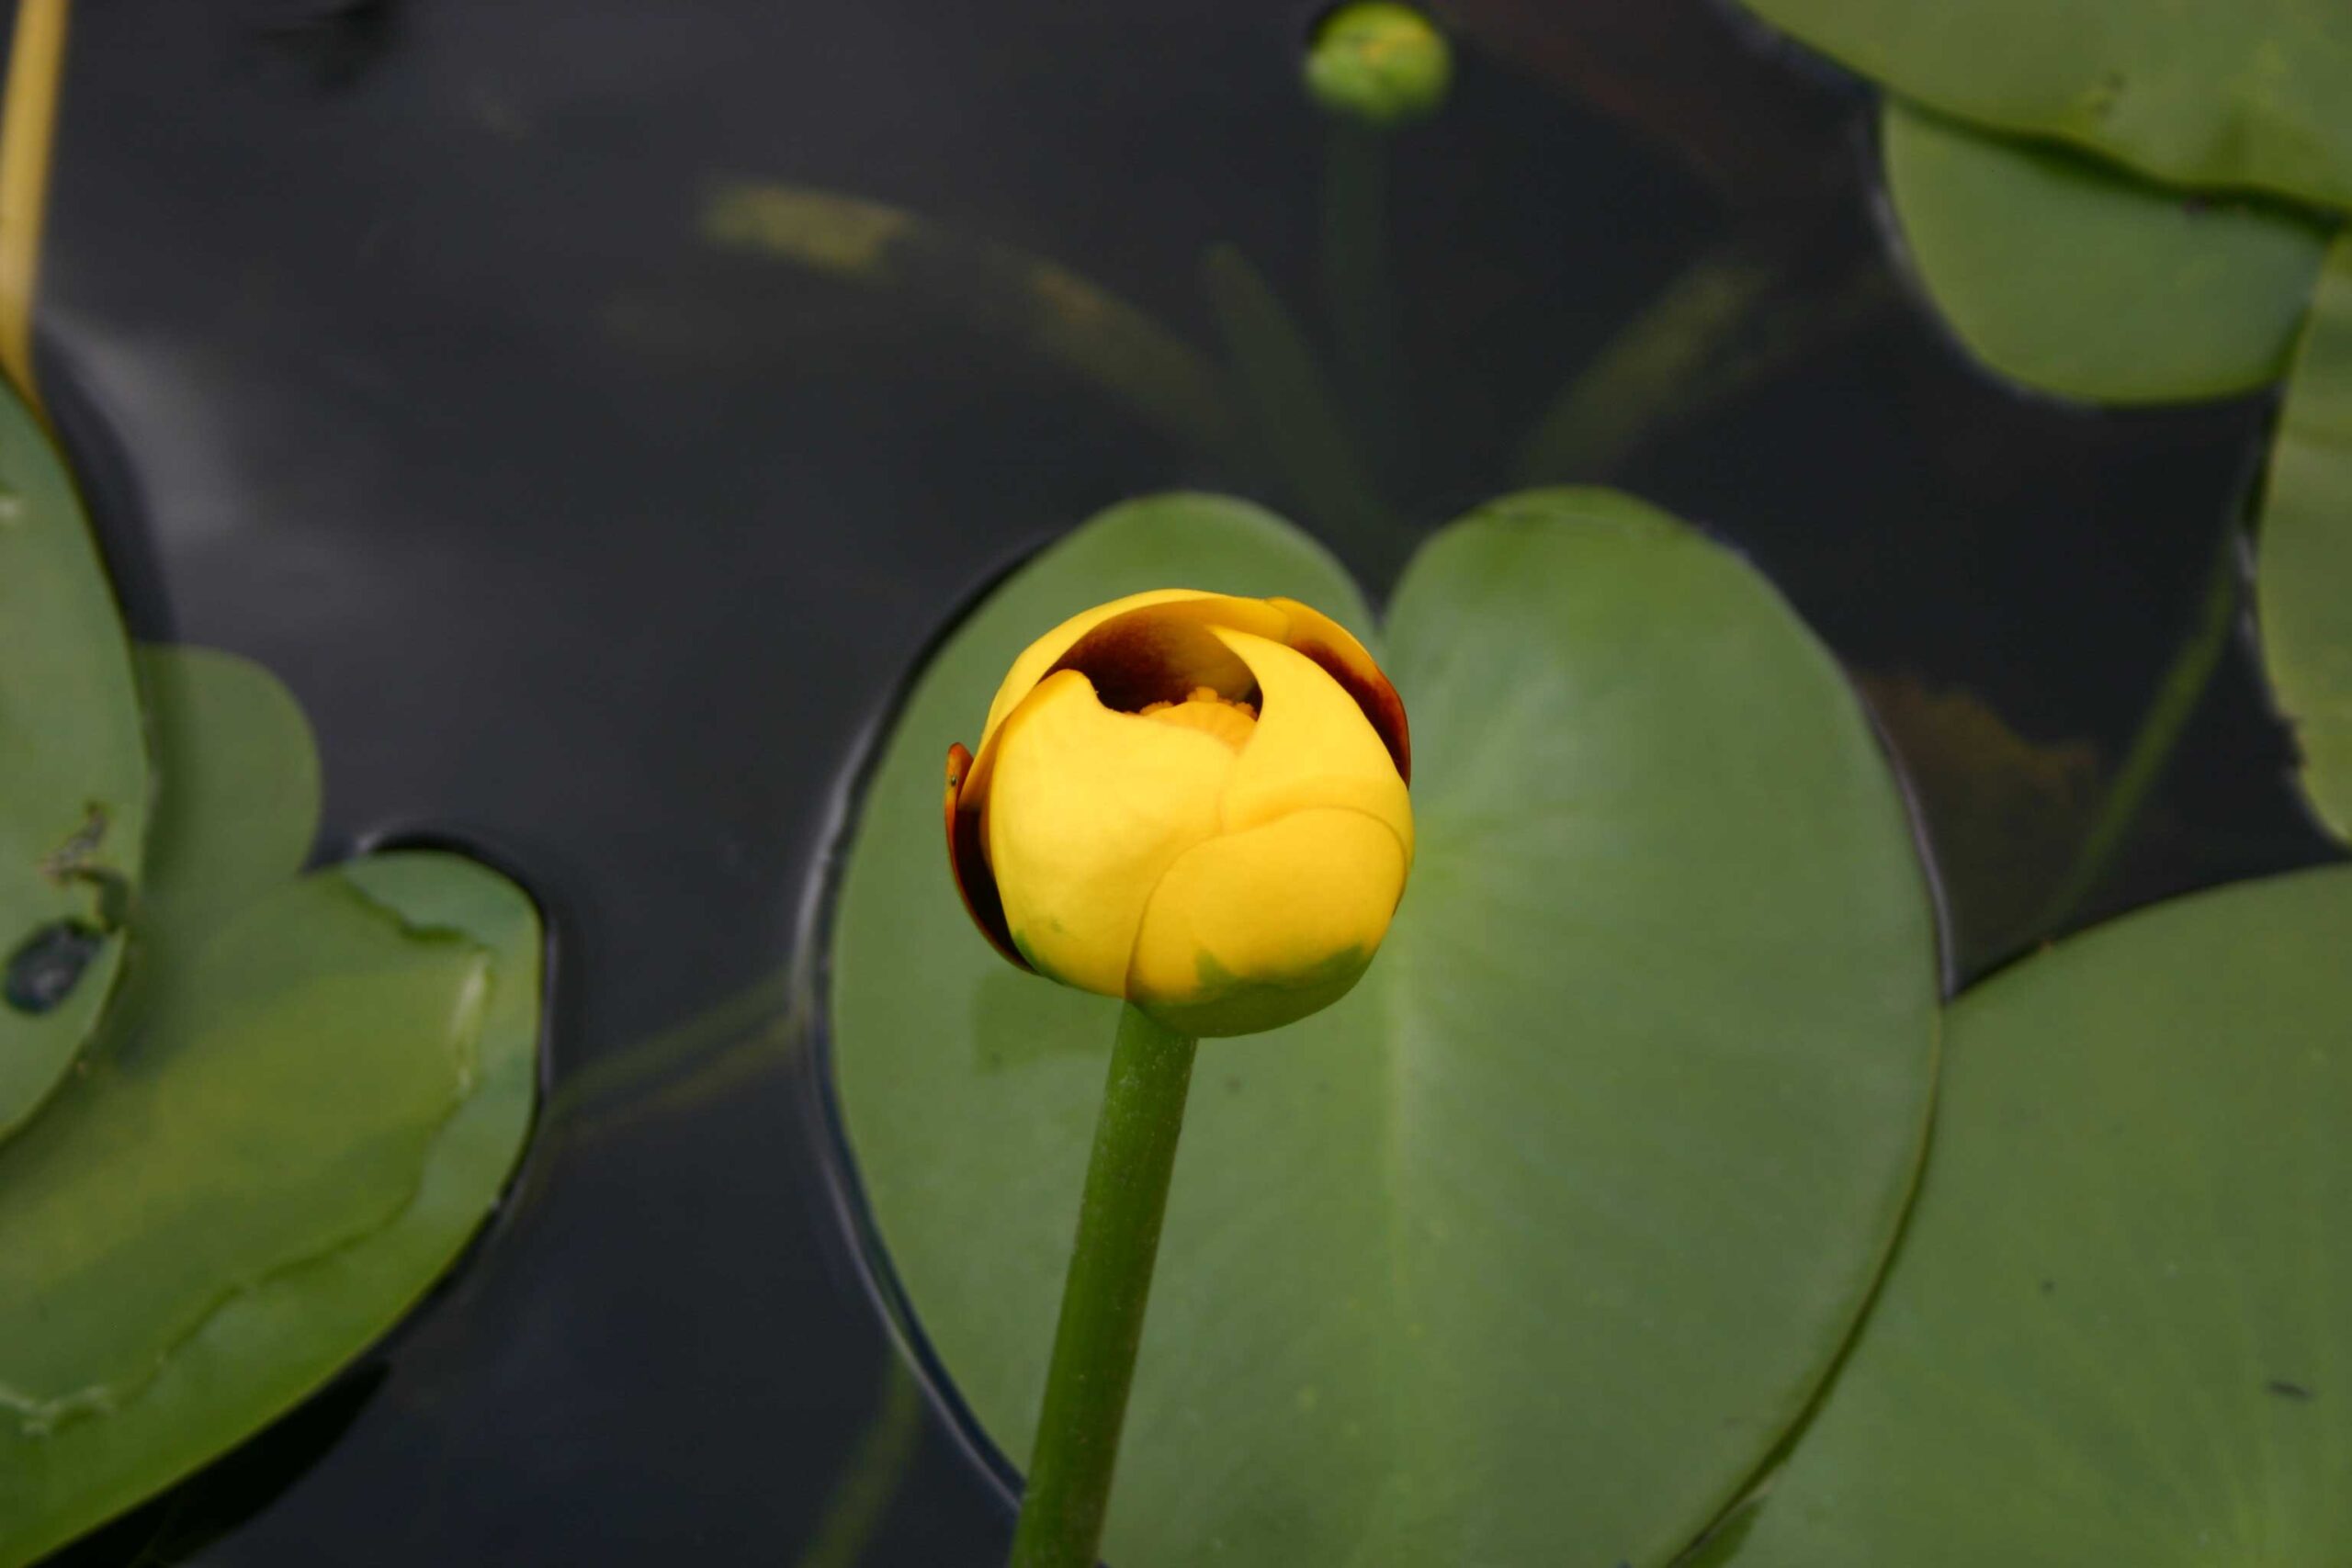 Close-up on a bright yellow flower that has not fully opens growing among lily leaves on the water's surface.